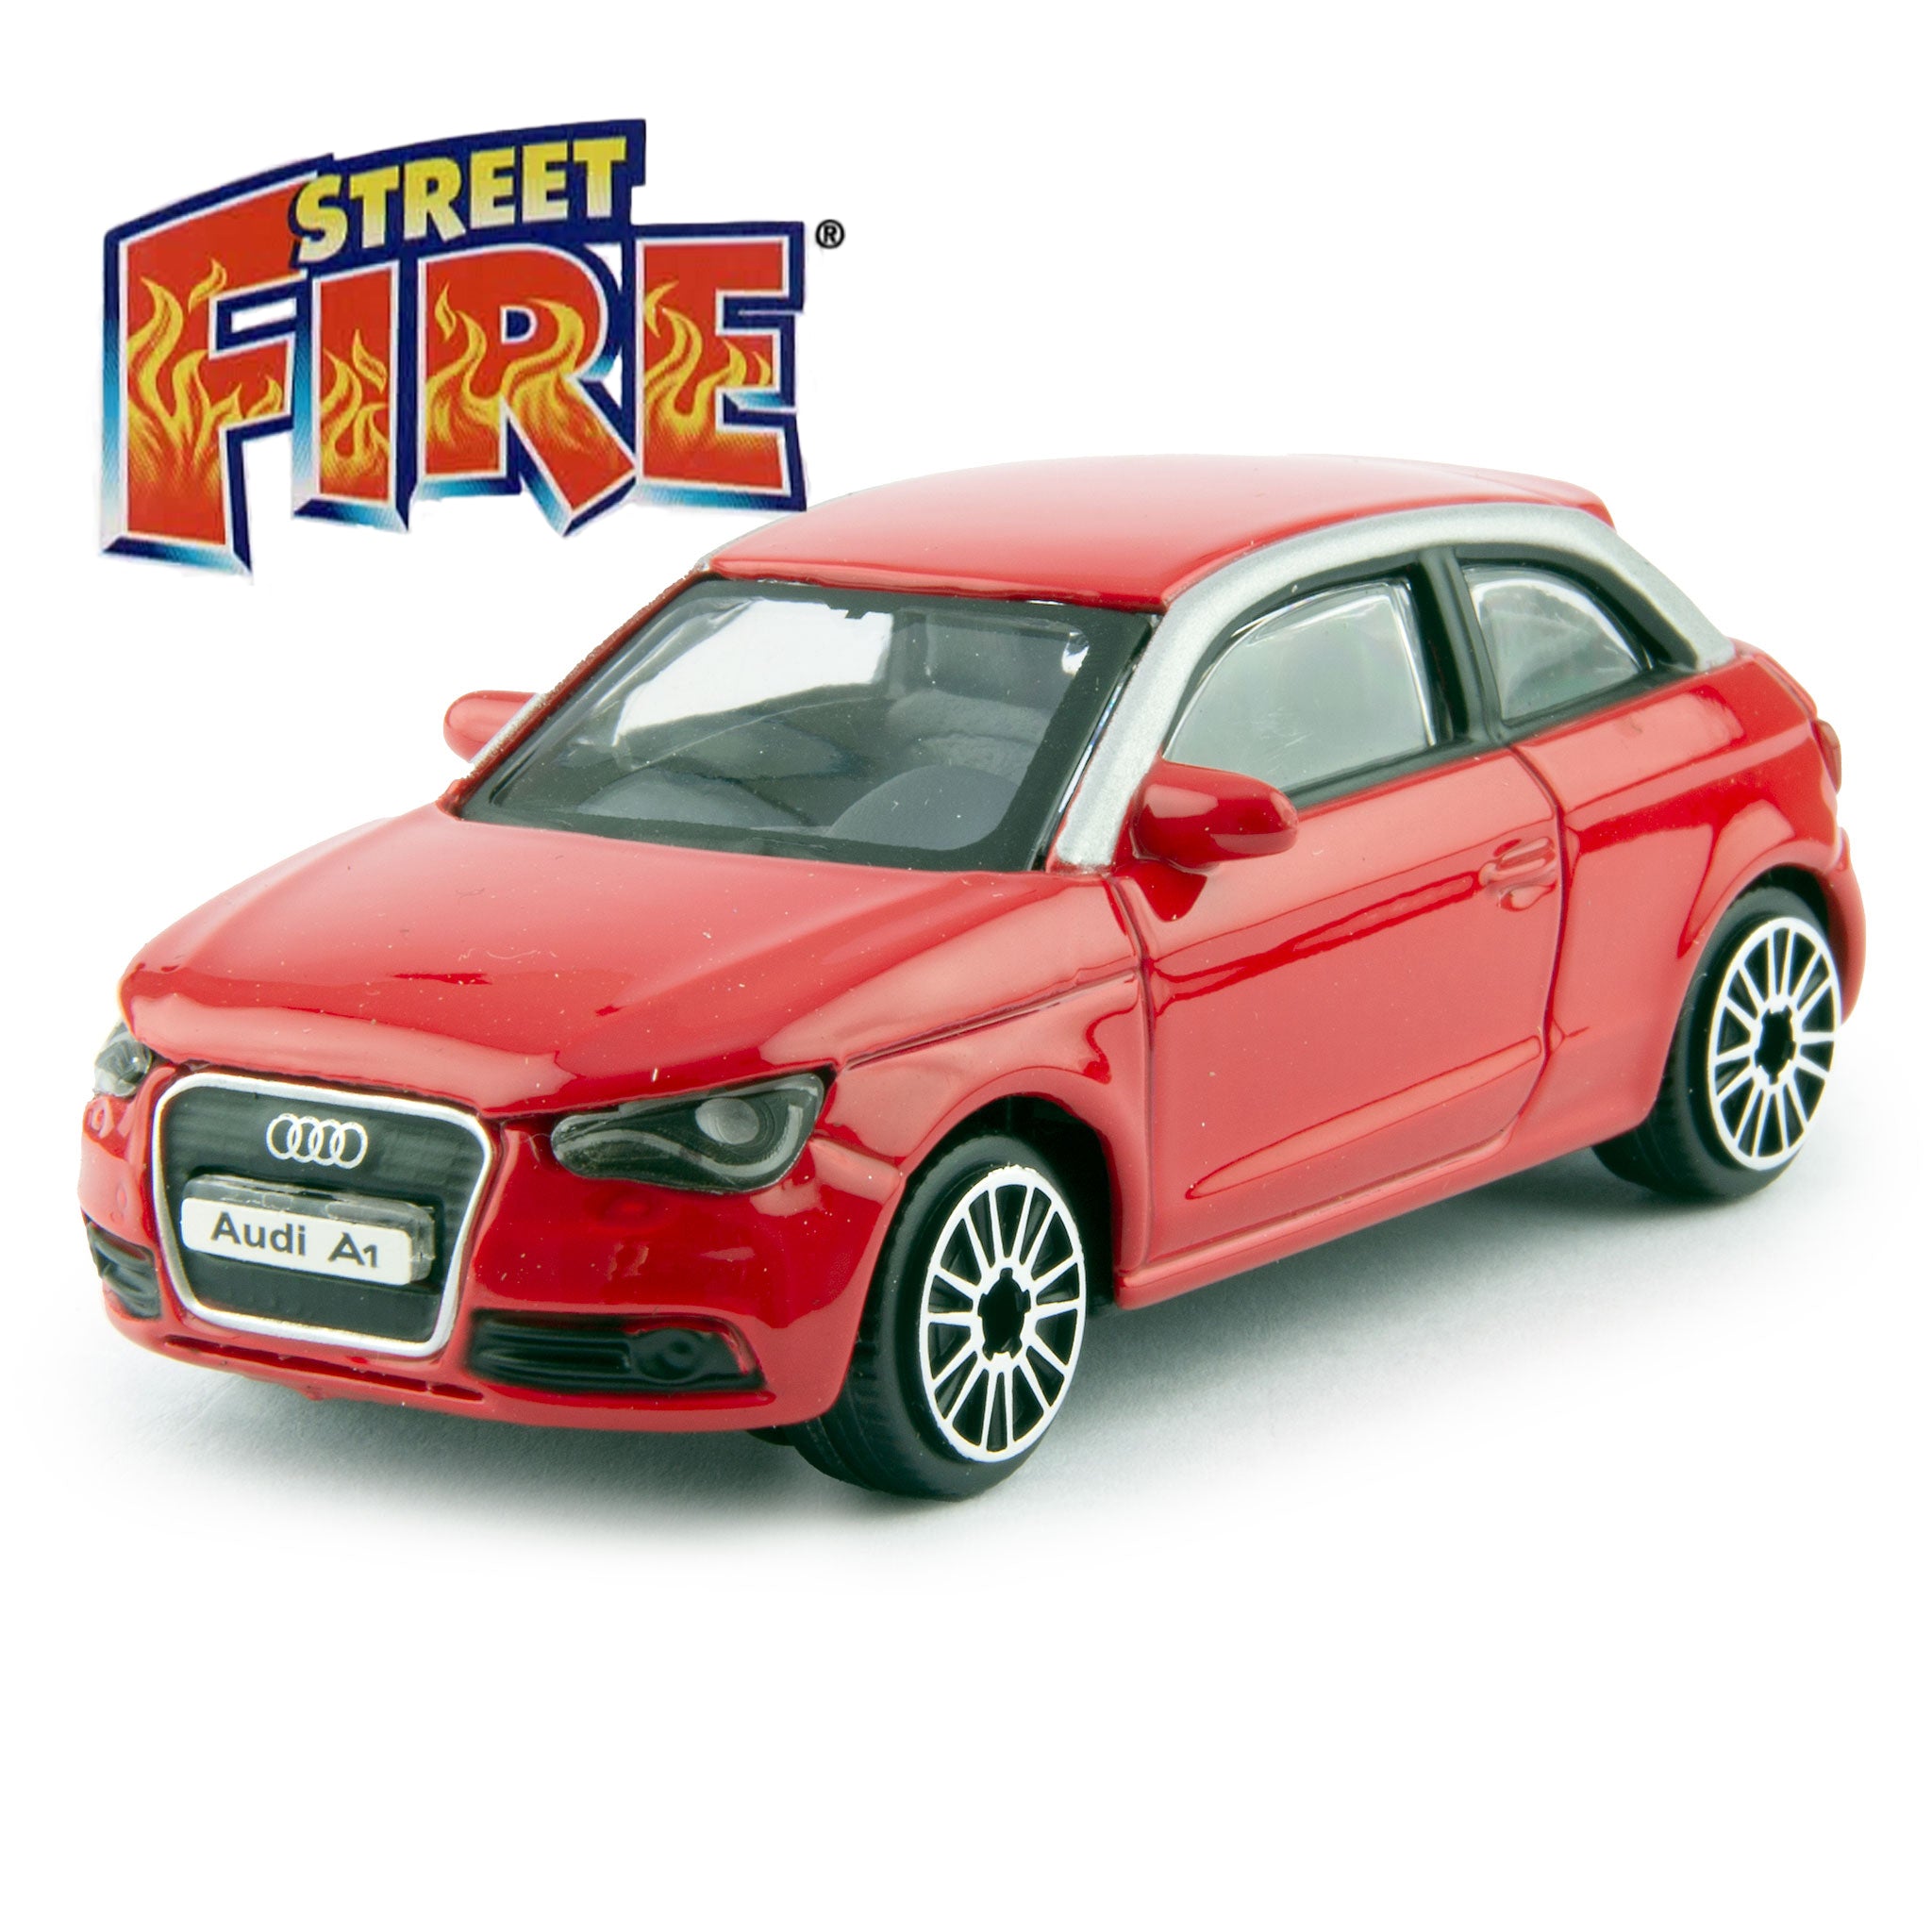 Audi A1 Diecast Toy Car 2010 red - 1:43 Scale